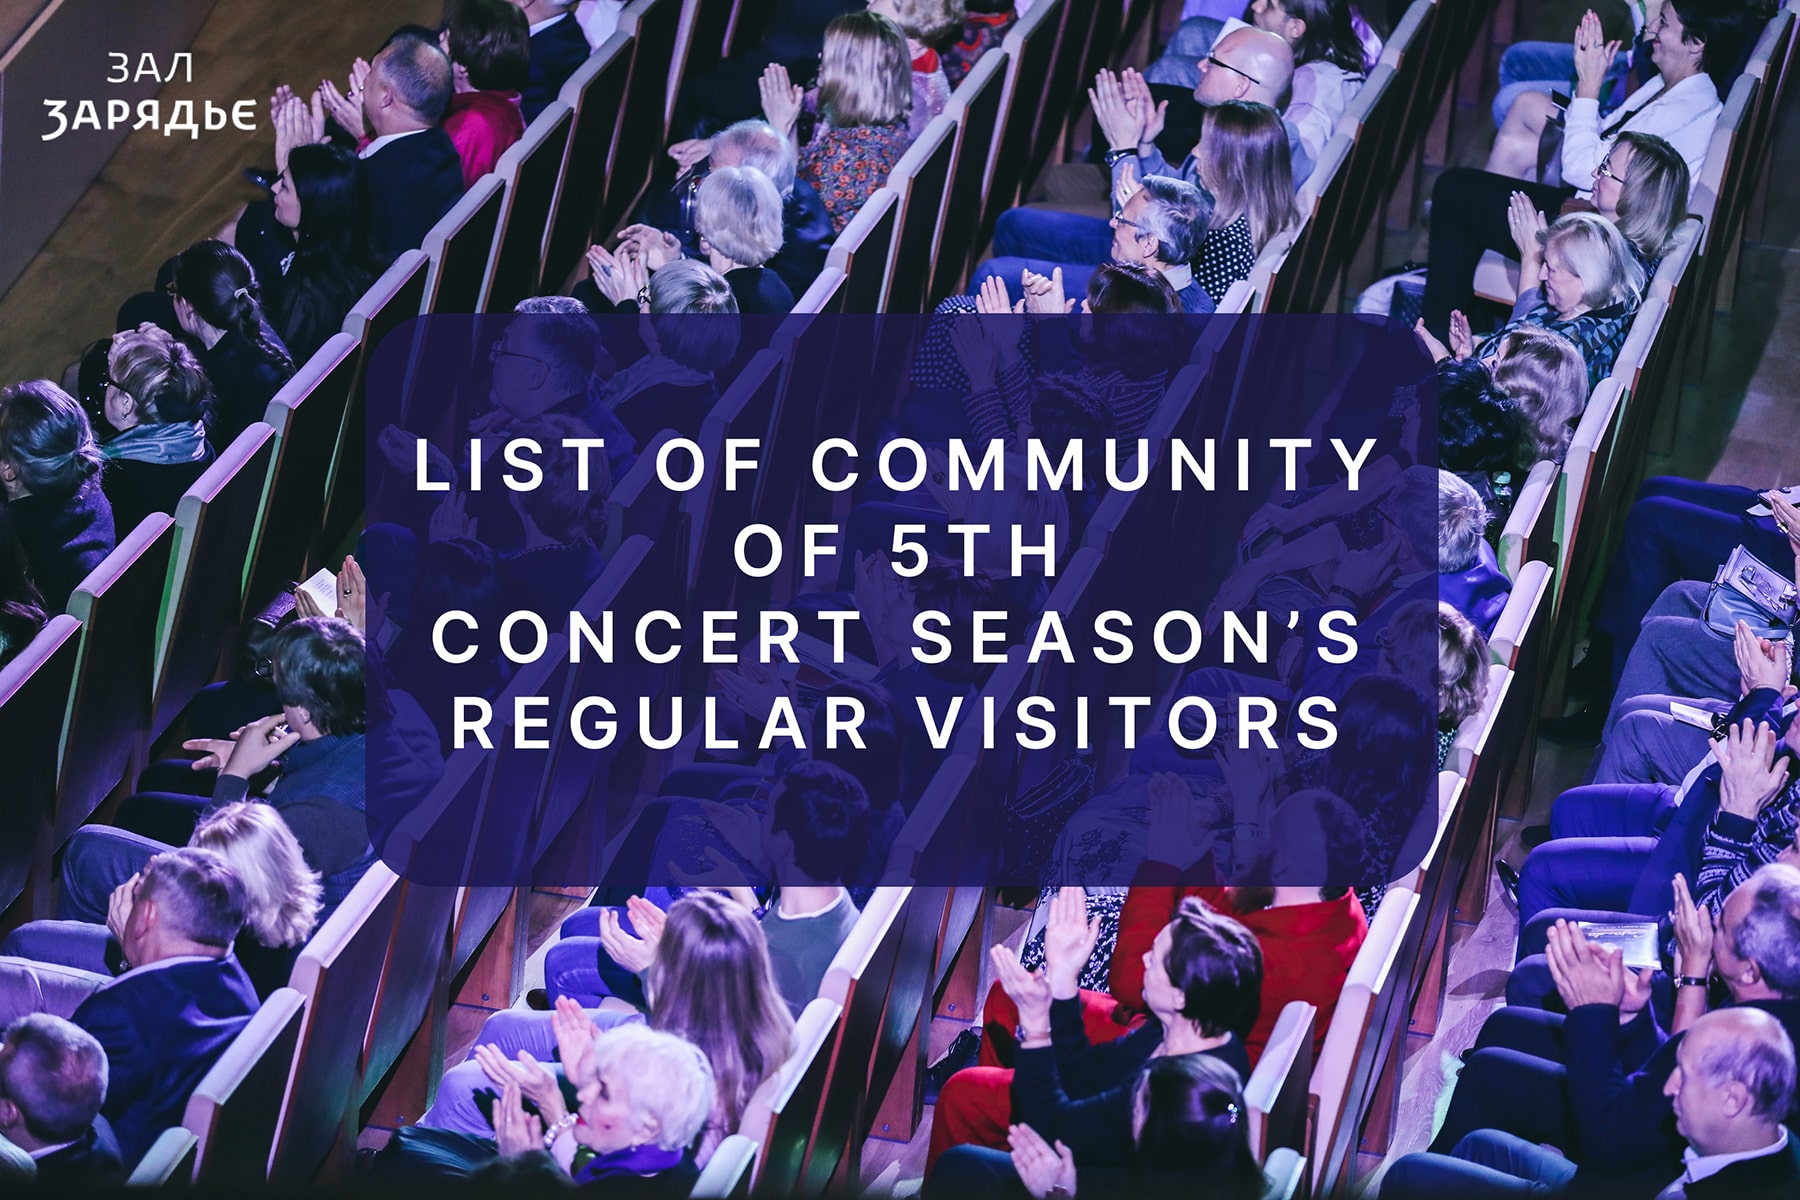 List of Community of 5th Concert Season’s Regular Visitors Out Now